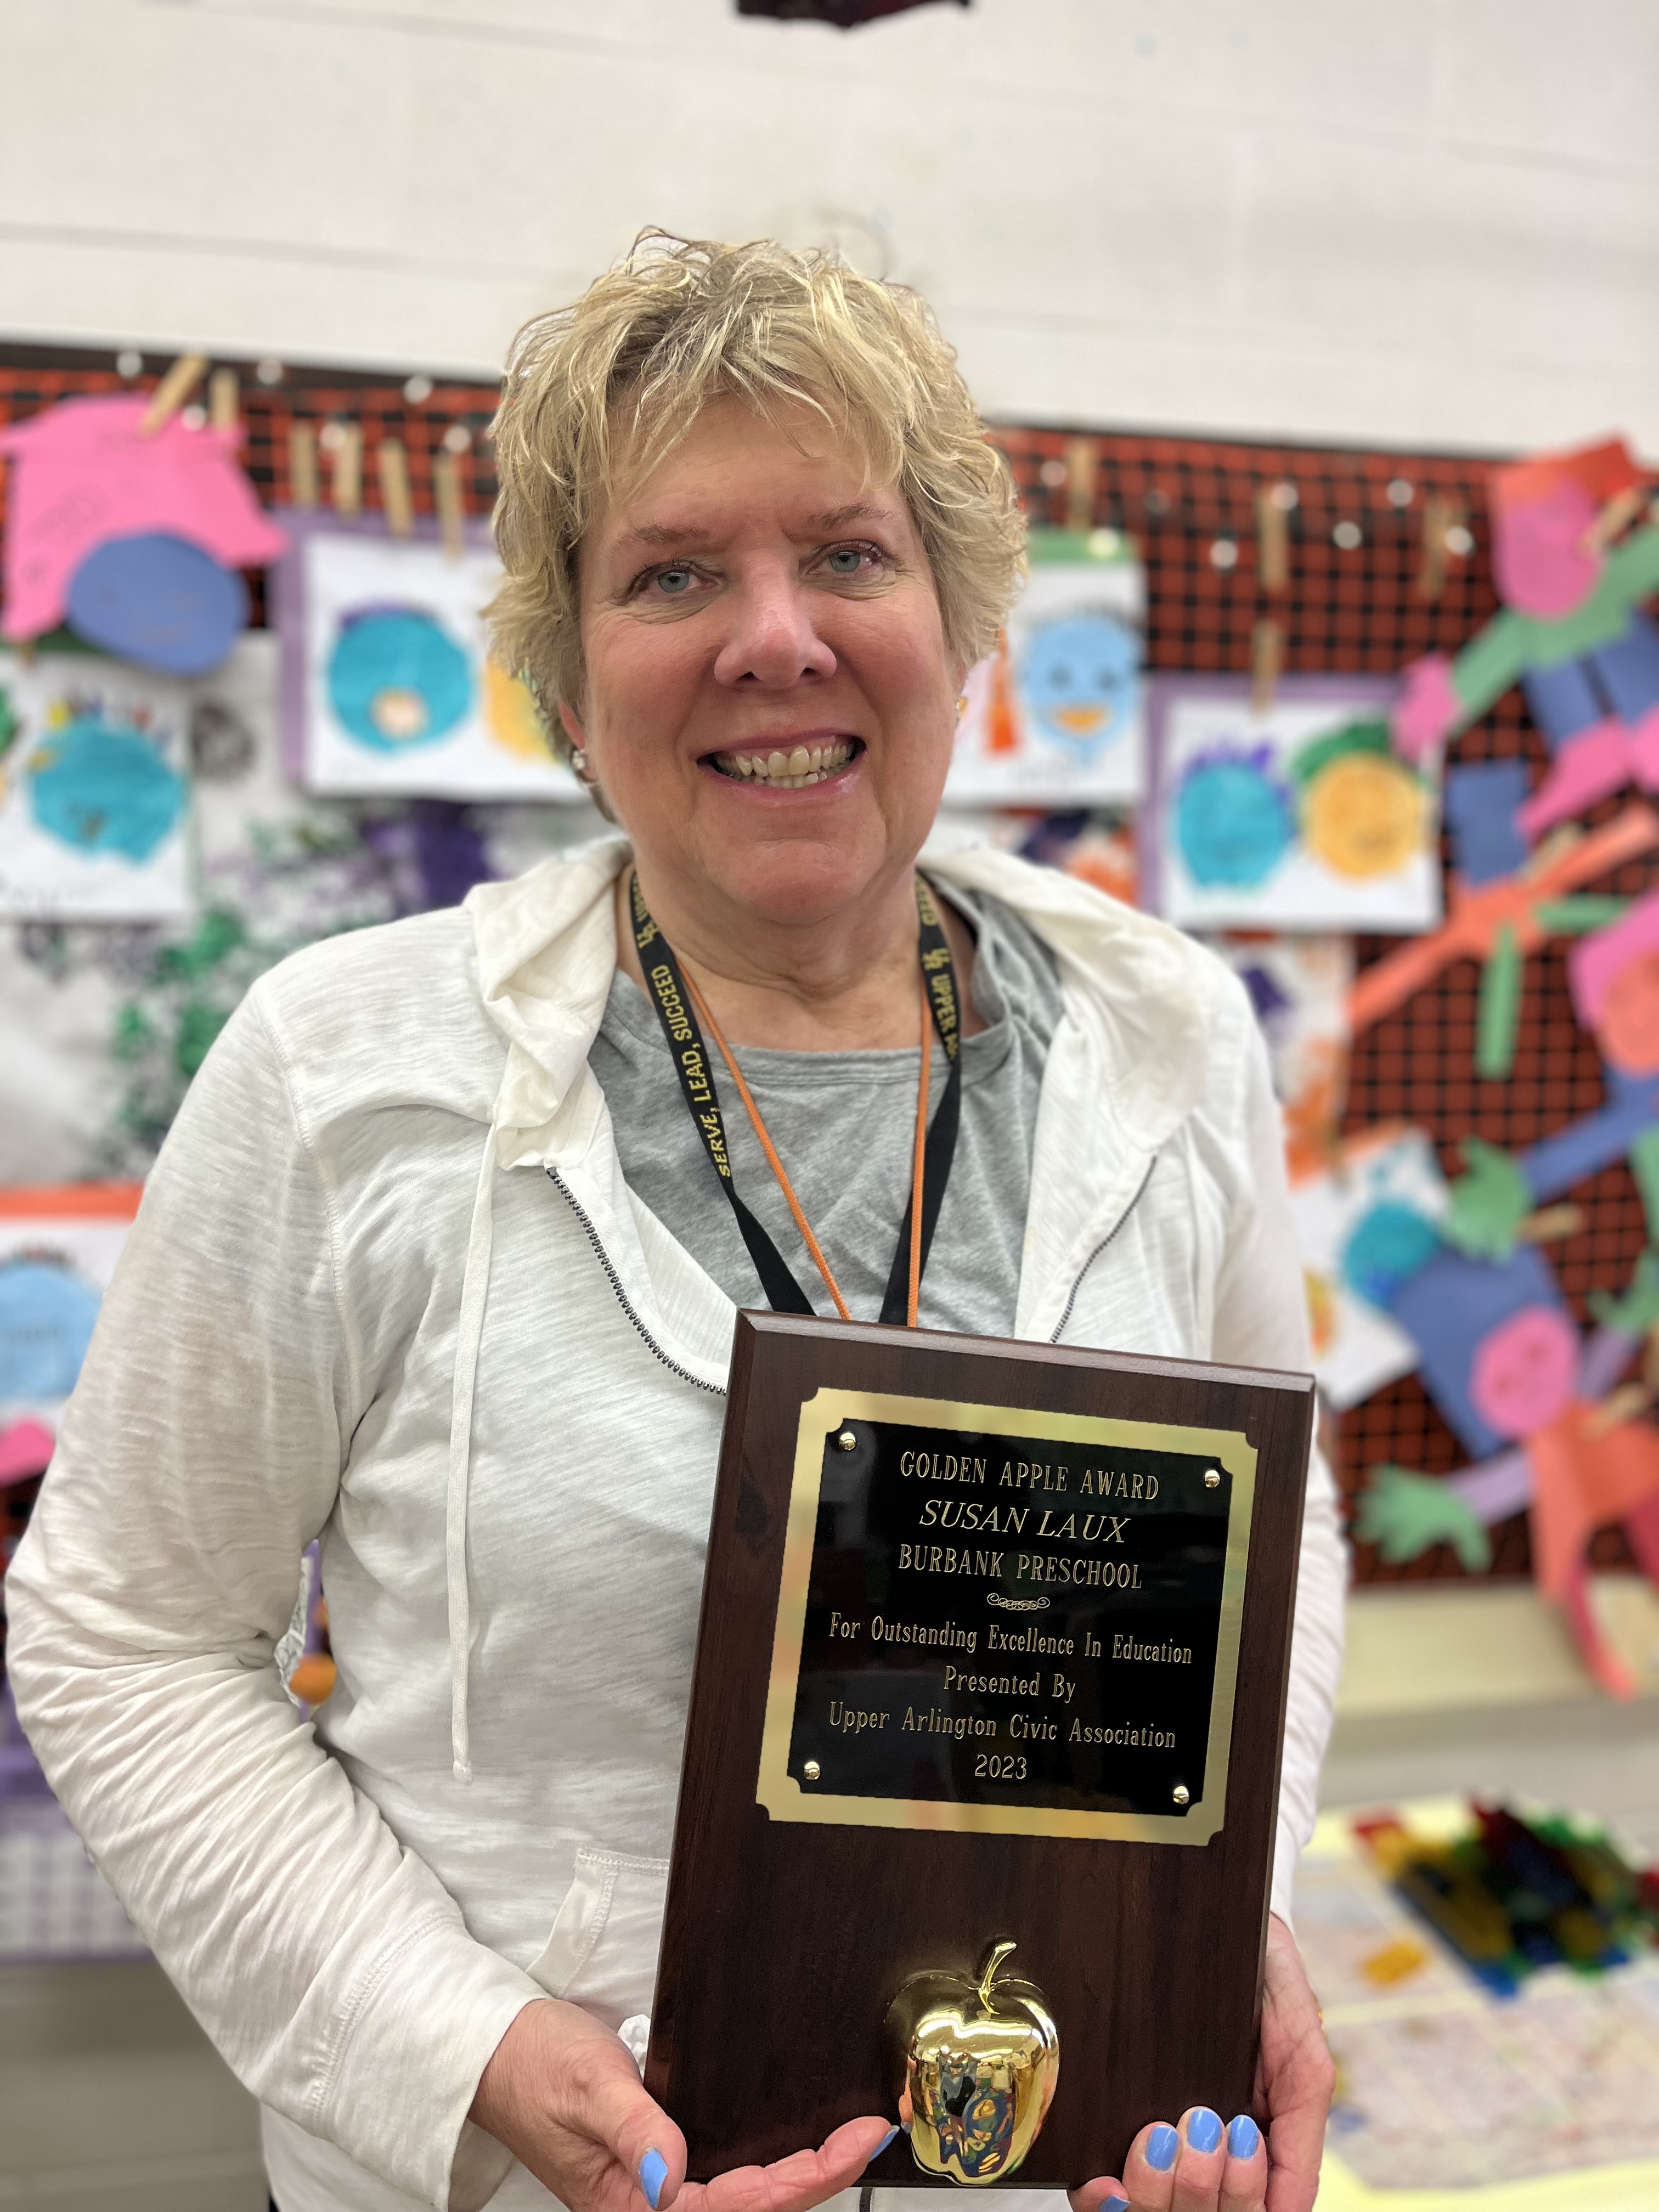 Susan Laux posing with her award